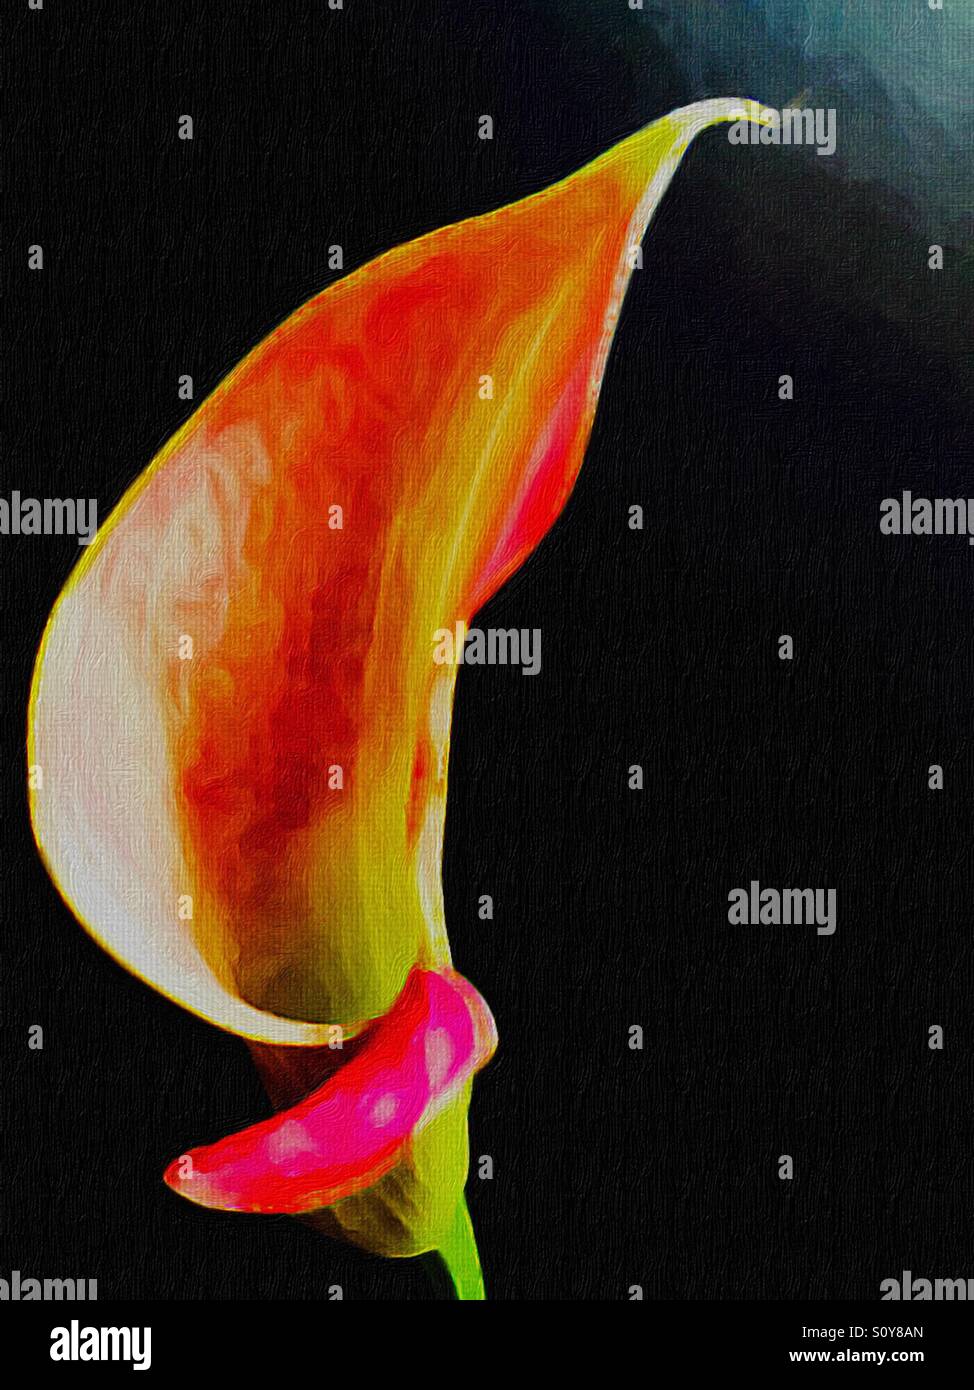 Painted Calla lily on a black background. Nature’s beauty embellished by an artist’s imagination. Inspiring rendition. Bold brushstrokes. Stock Photo